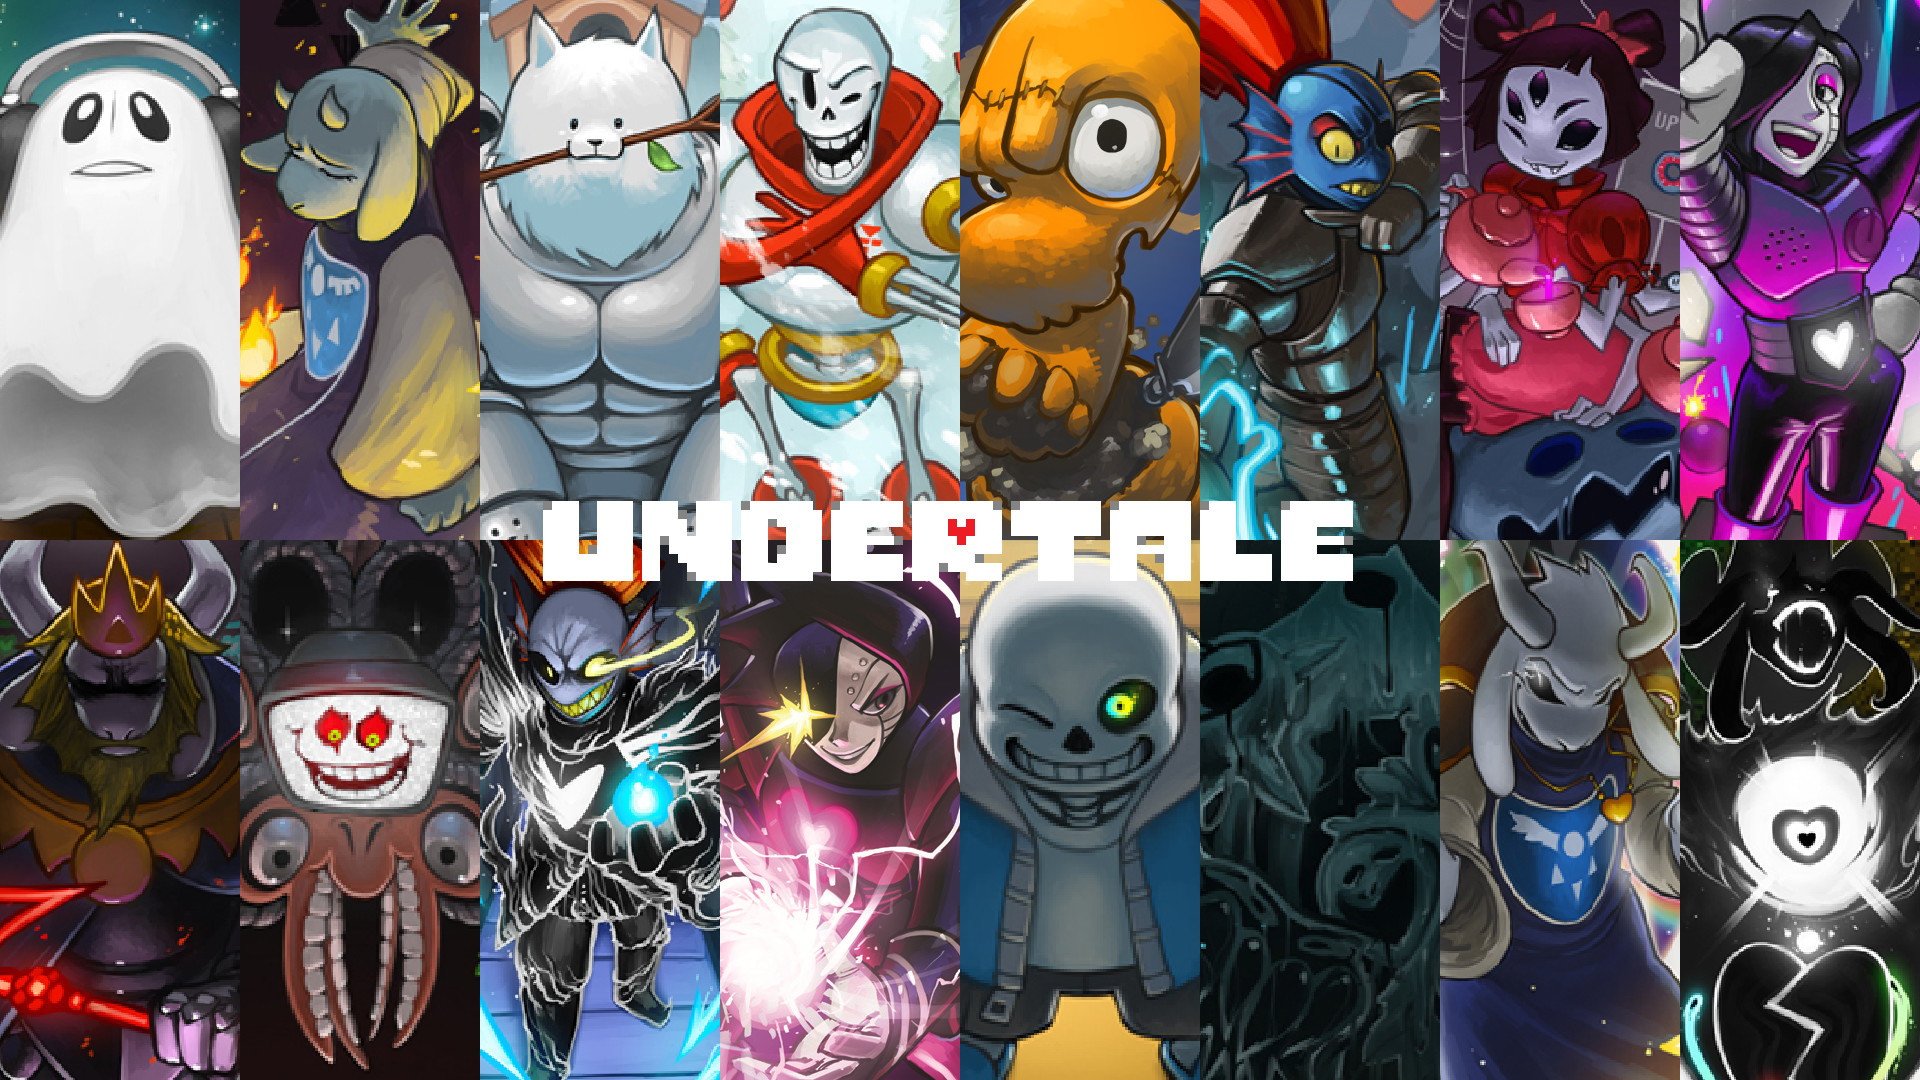 1920x1080 undertale images Undertale Wallpaper HD wallpaper and background photos